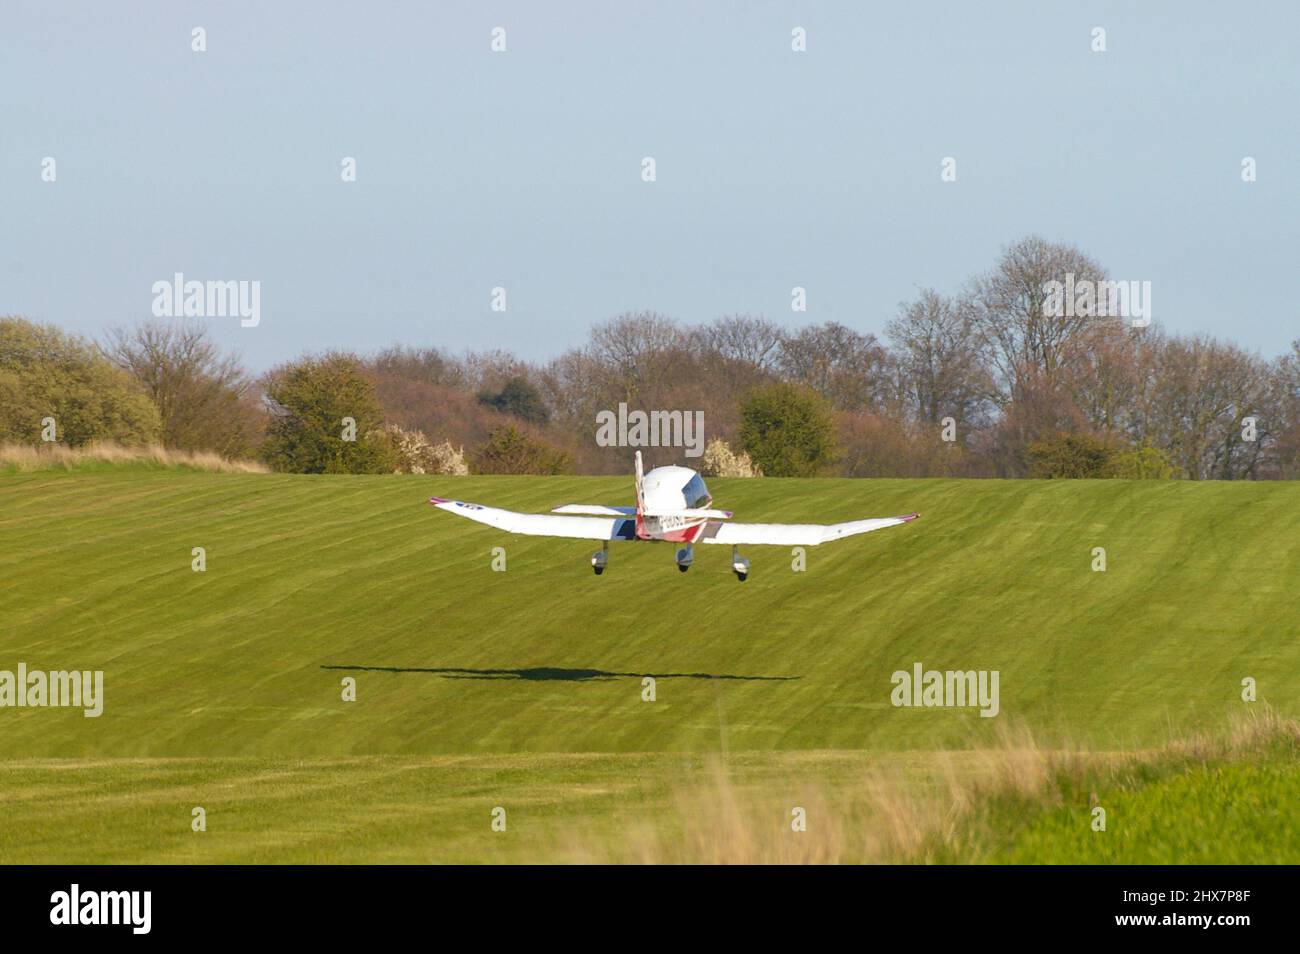 Pierre Robin DR400 Regent light plane taking off from undulating grass runway at Great Oakley airfield, Essex, UK. Private flying in countryside Stock Photo